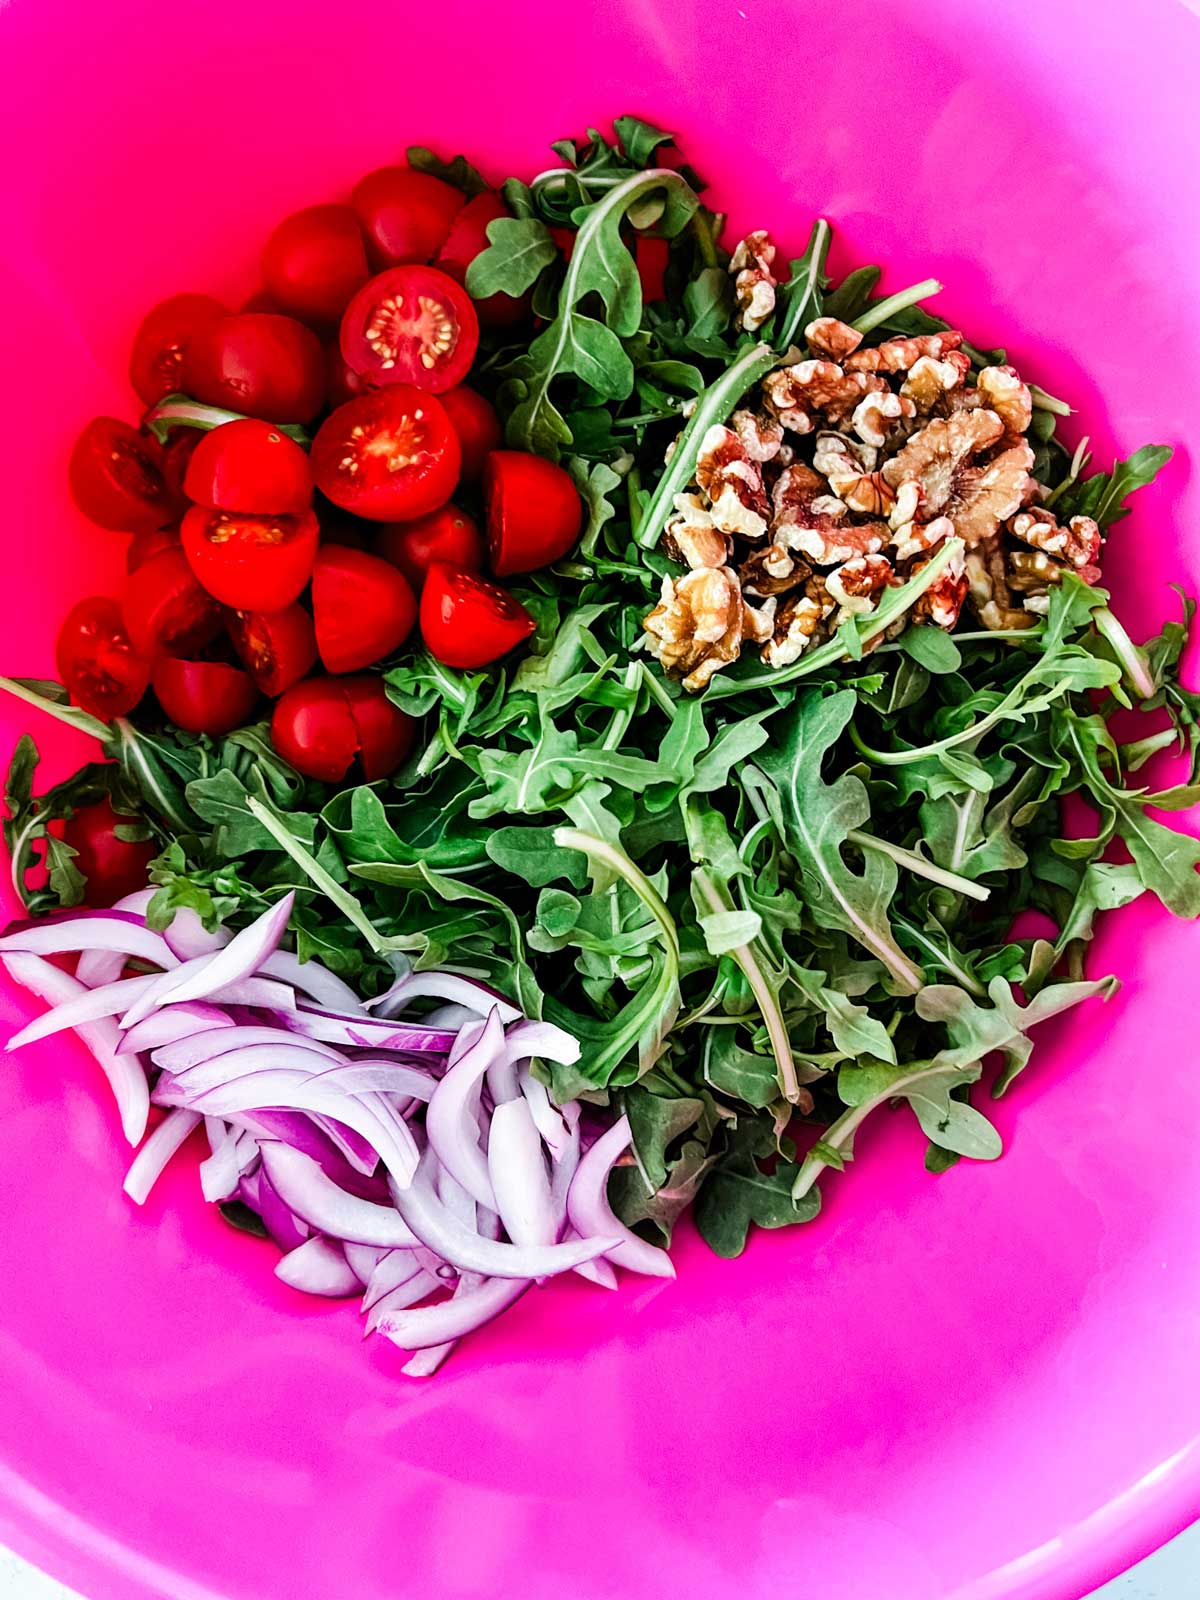 Arugula, tomato, walnuts, and red onion in a pink bowl.